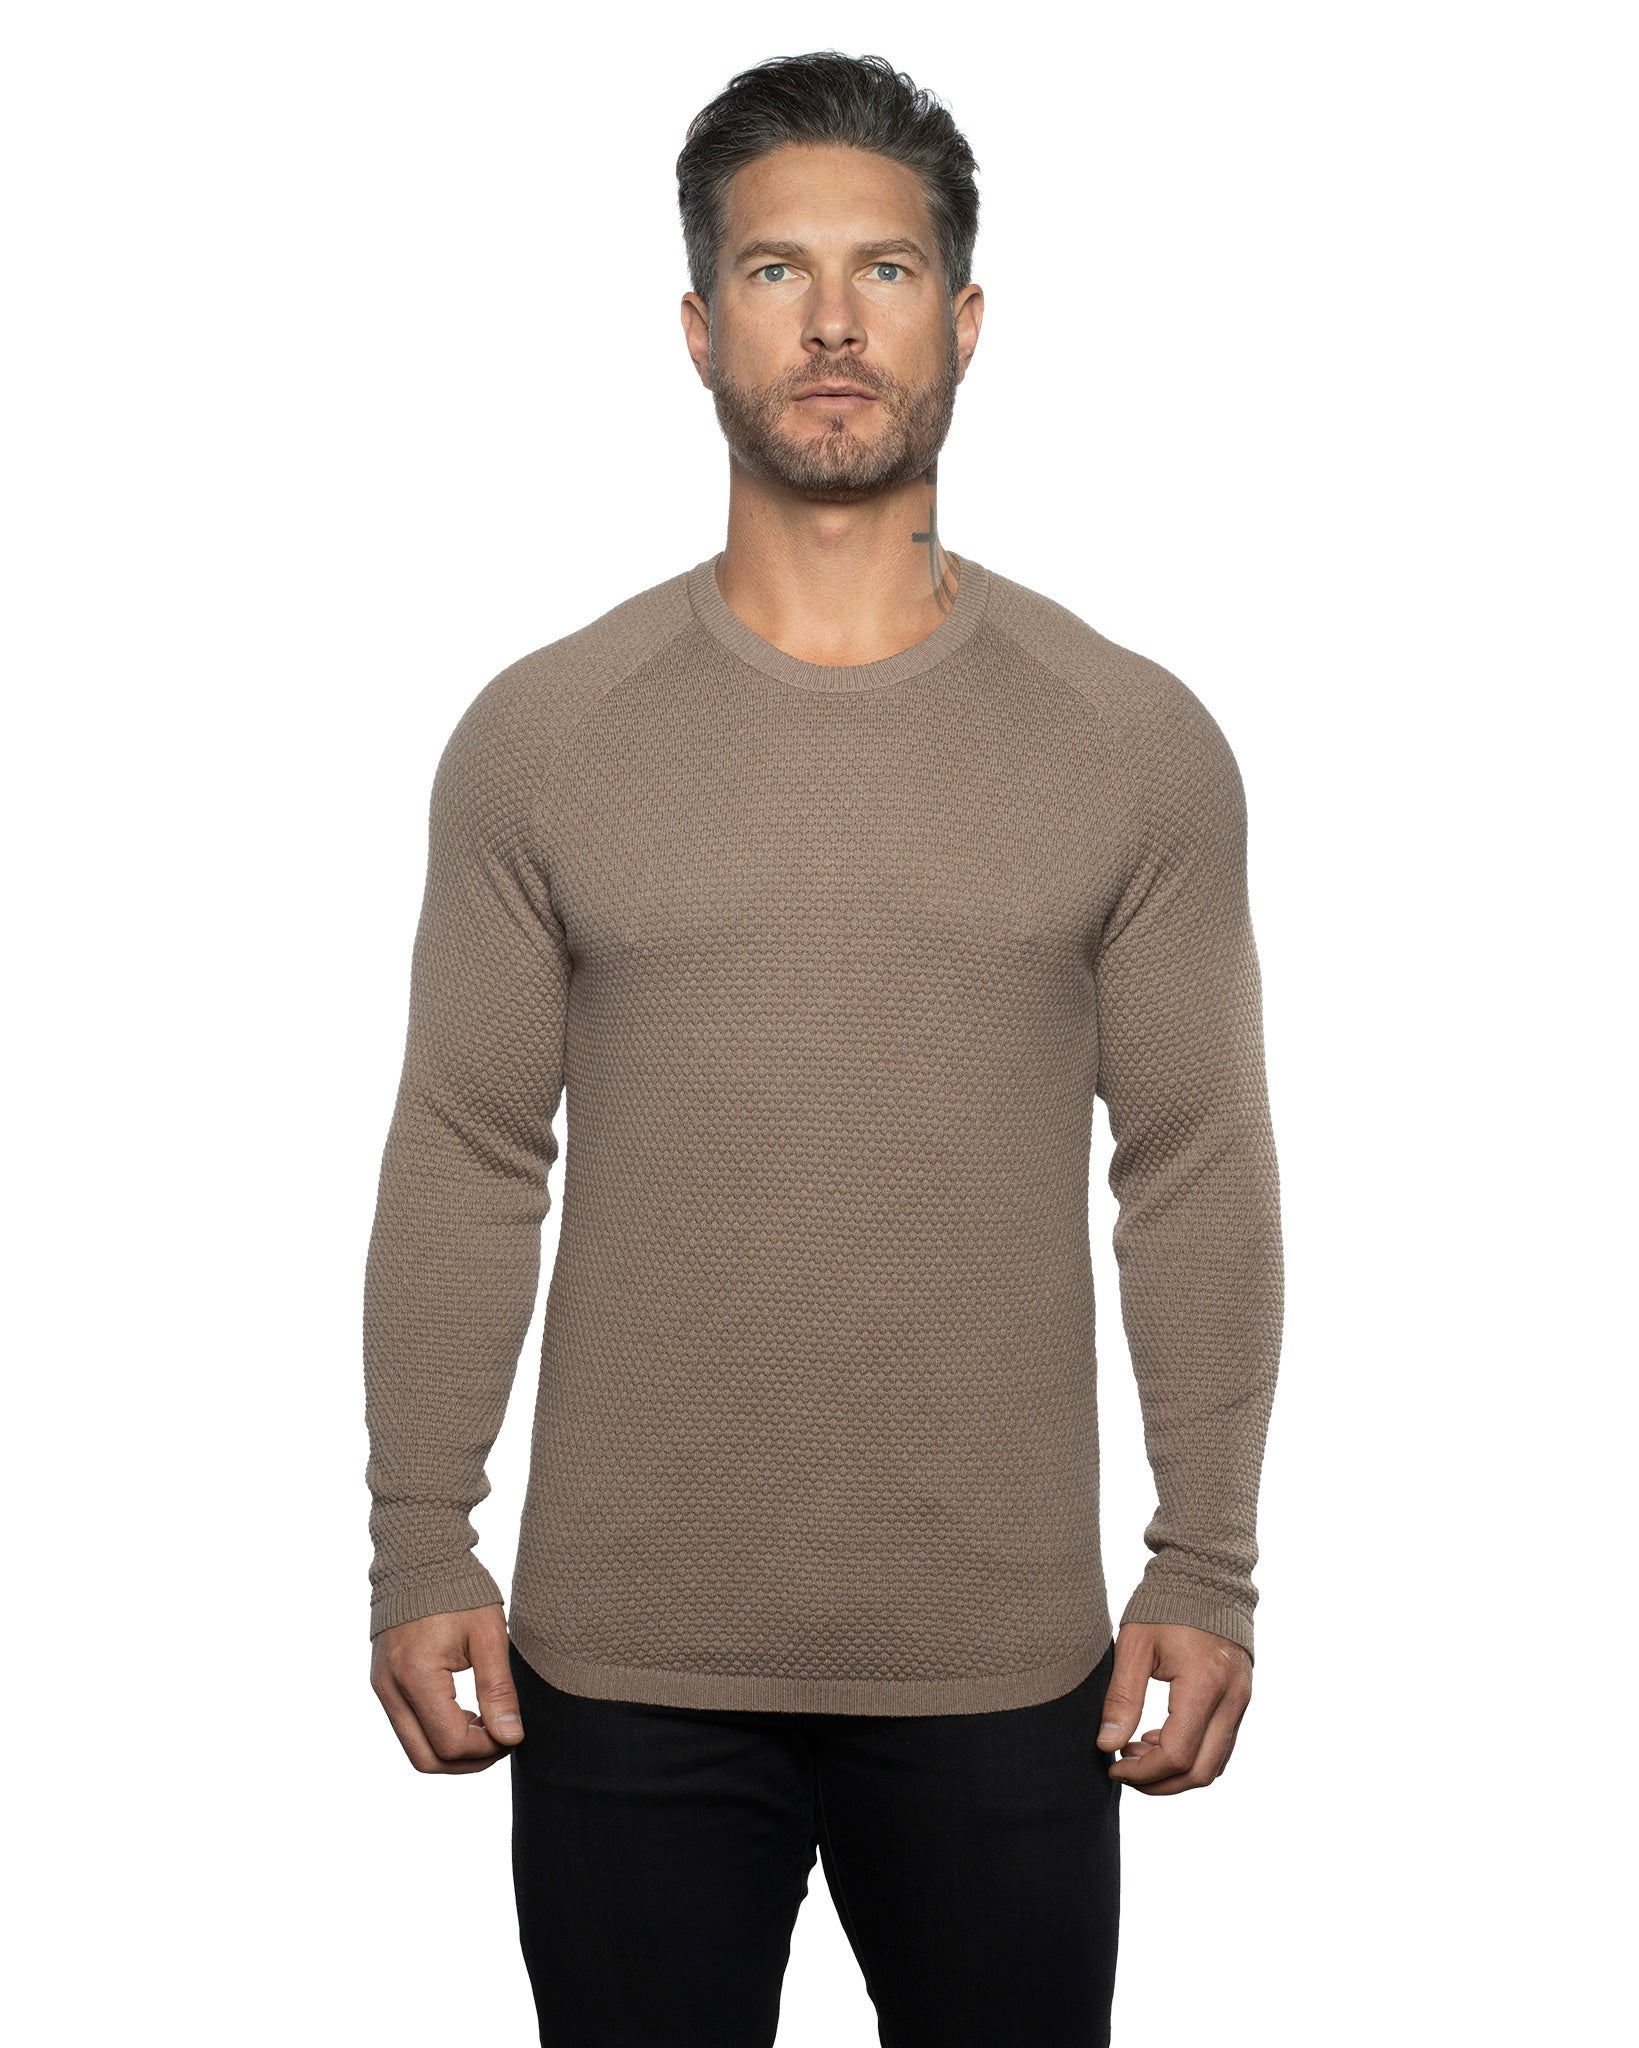 The Ripley Crew Neck Cotton & Cashmere FITTED Sweater - WESTON JON BOUCHÉR